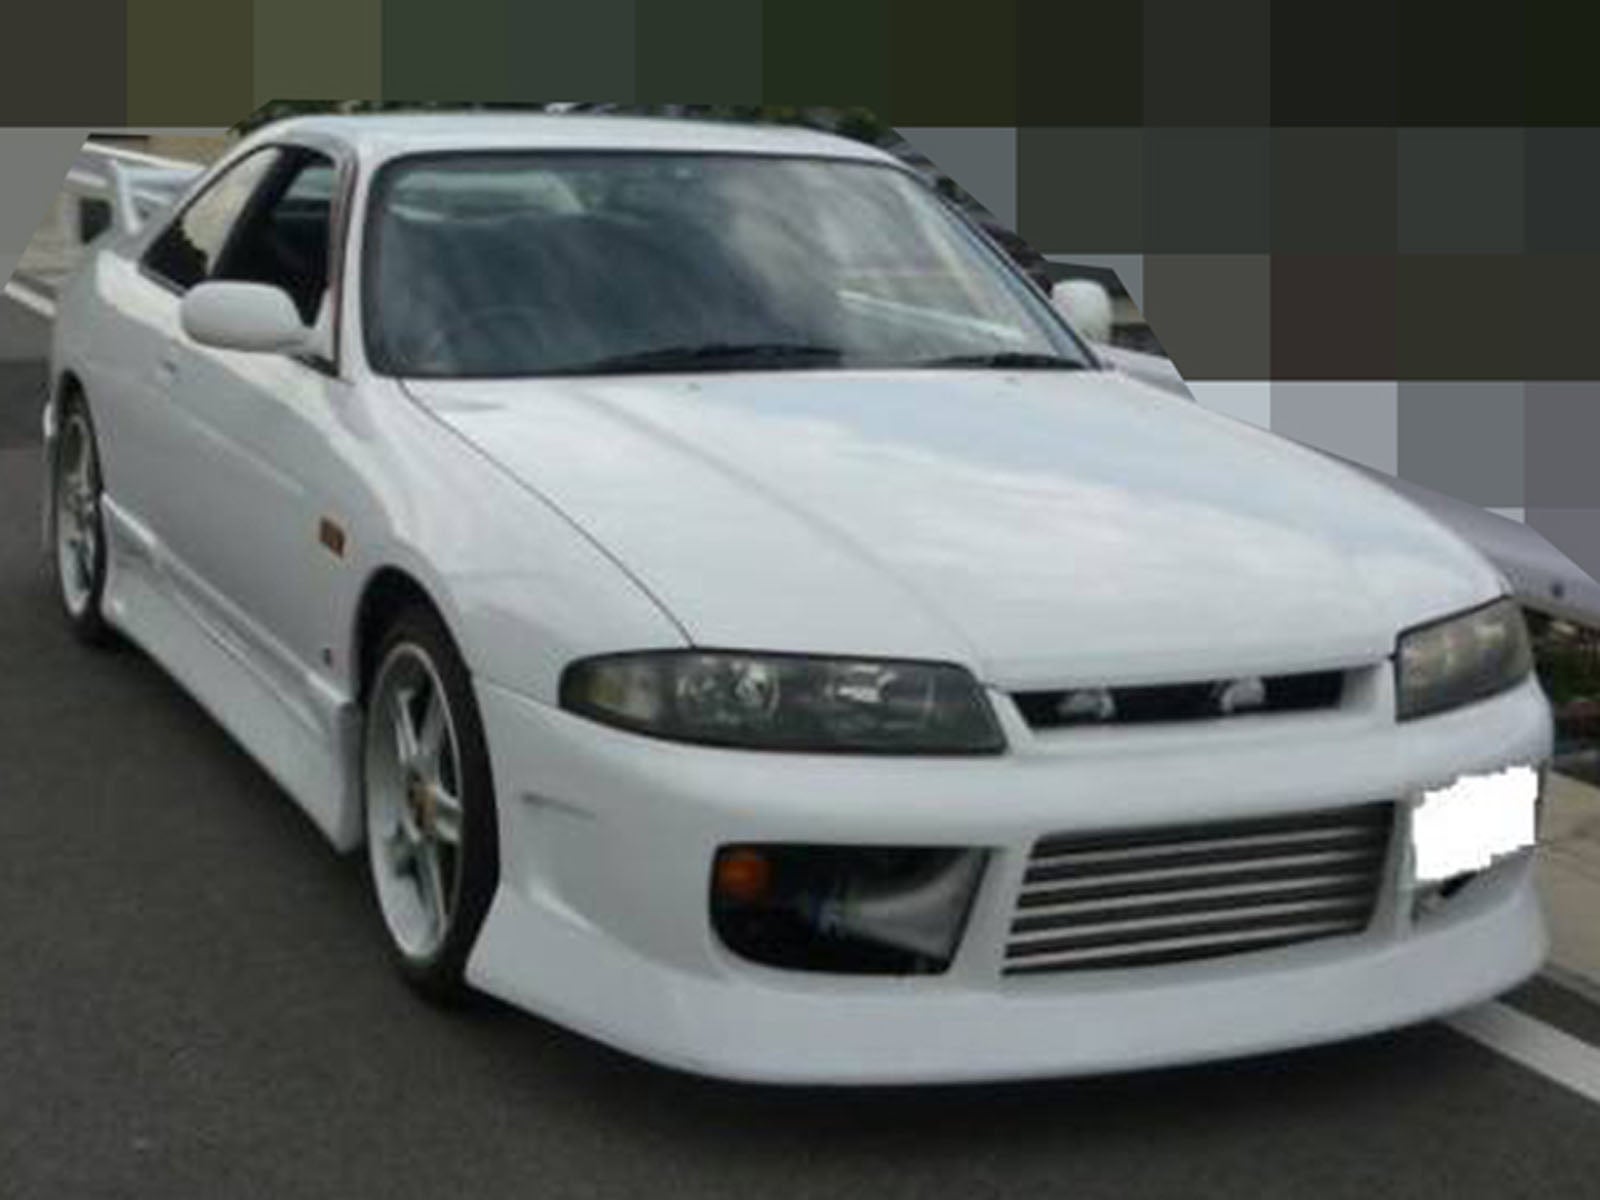 Used nissan skyline for sale in florida